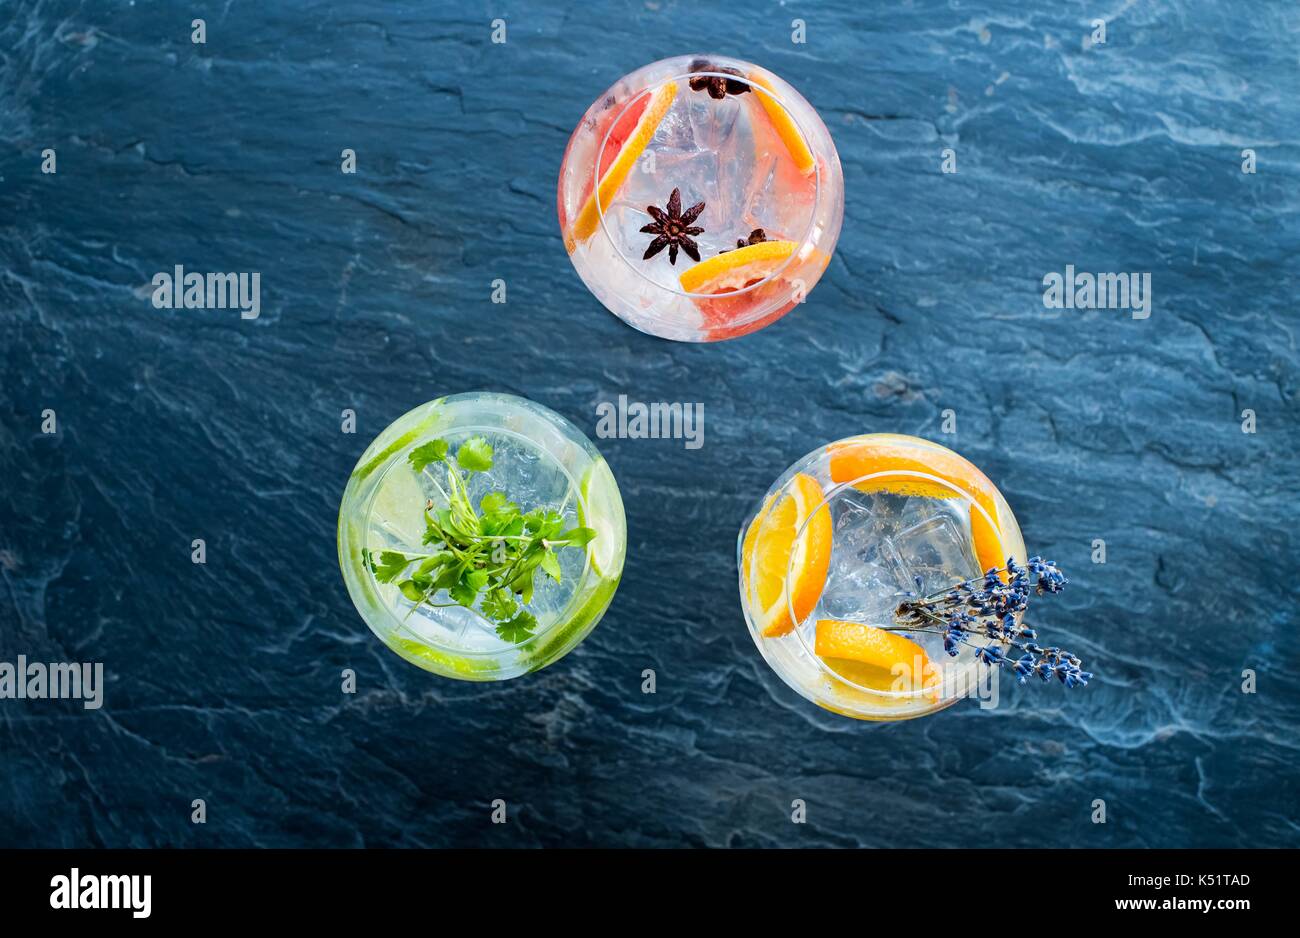 Cocktail drinks on a bar Stock Photo